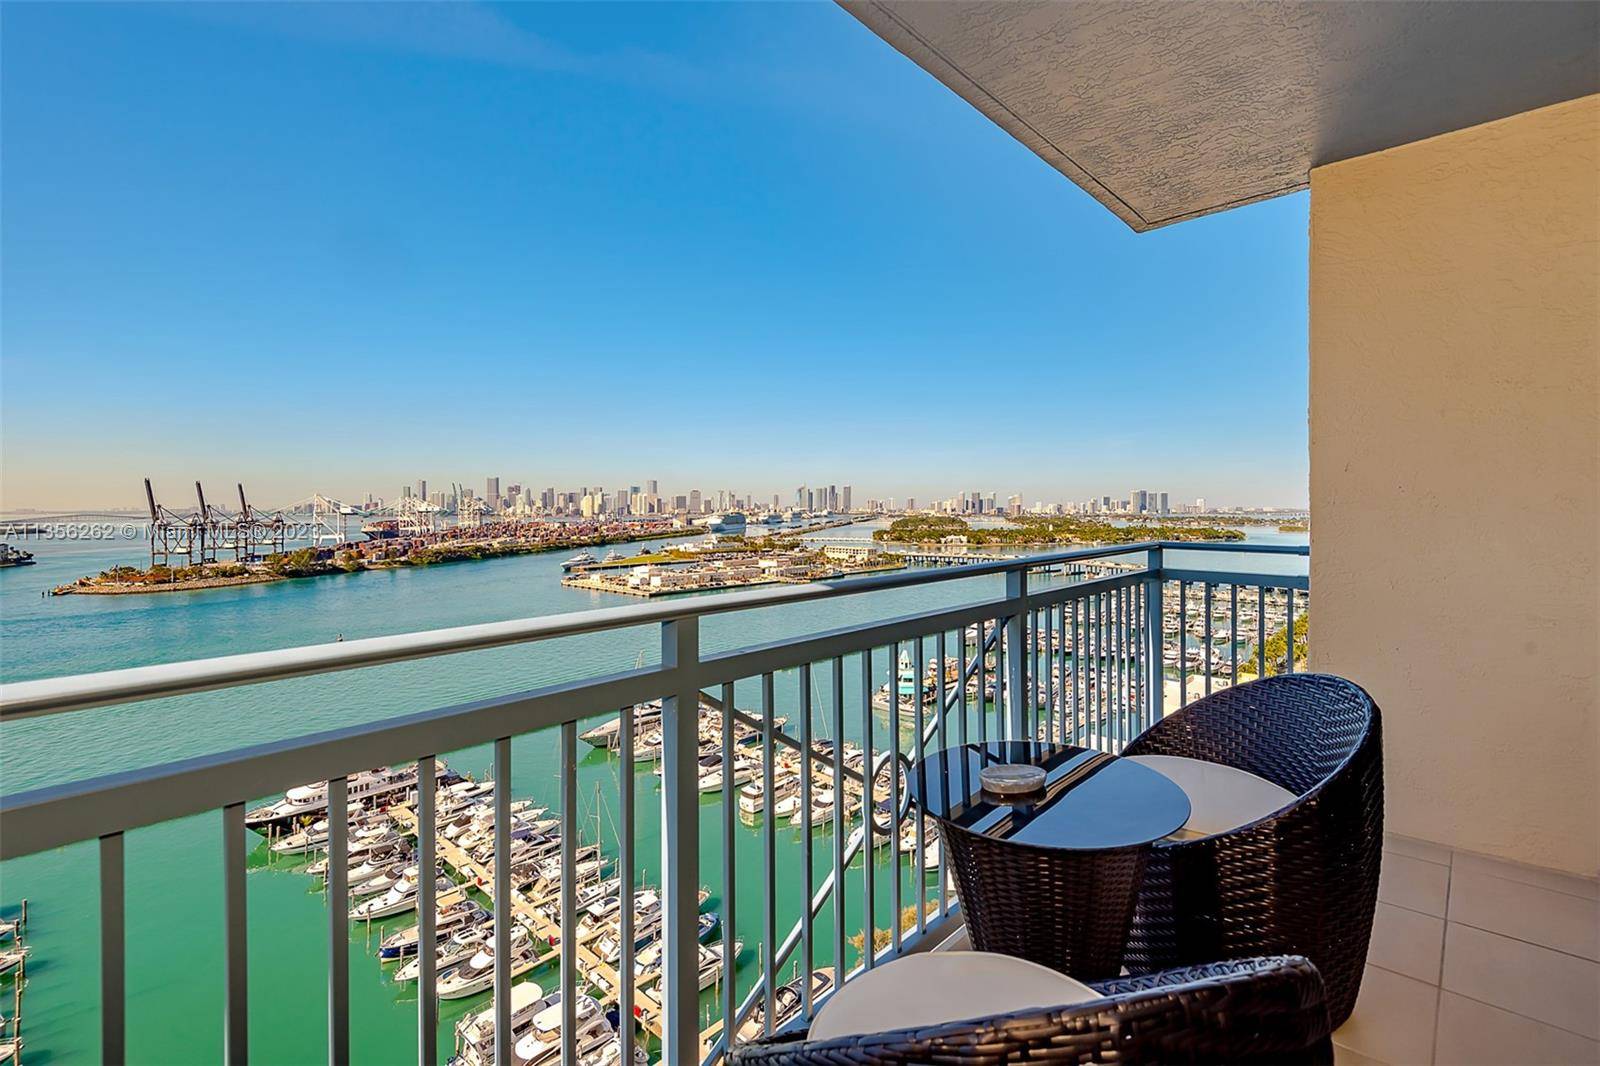 Contact agent for price. Beautifully renovated 2 bedroom, 2 bathroom unit on the 24th floor with views of downtown, bay and fisher island.